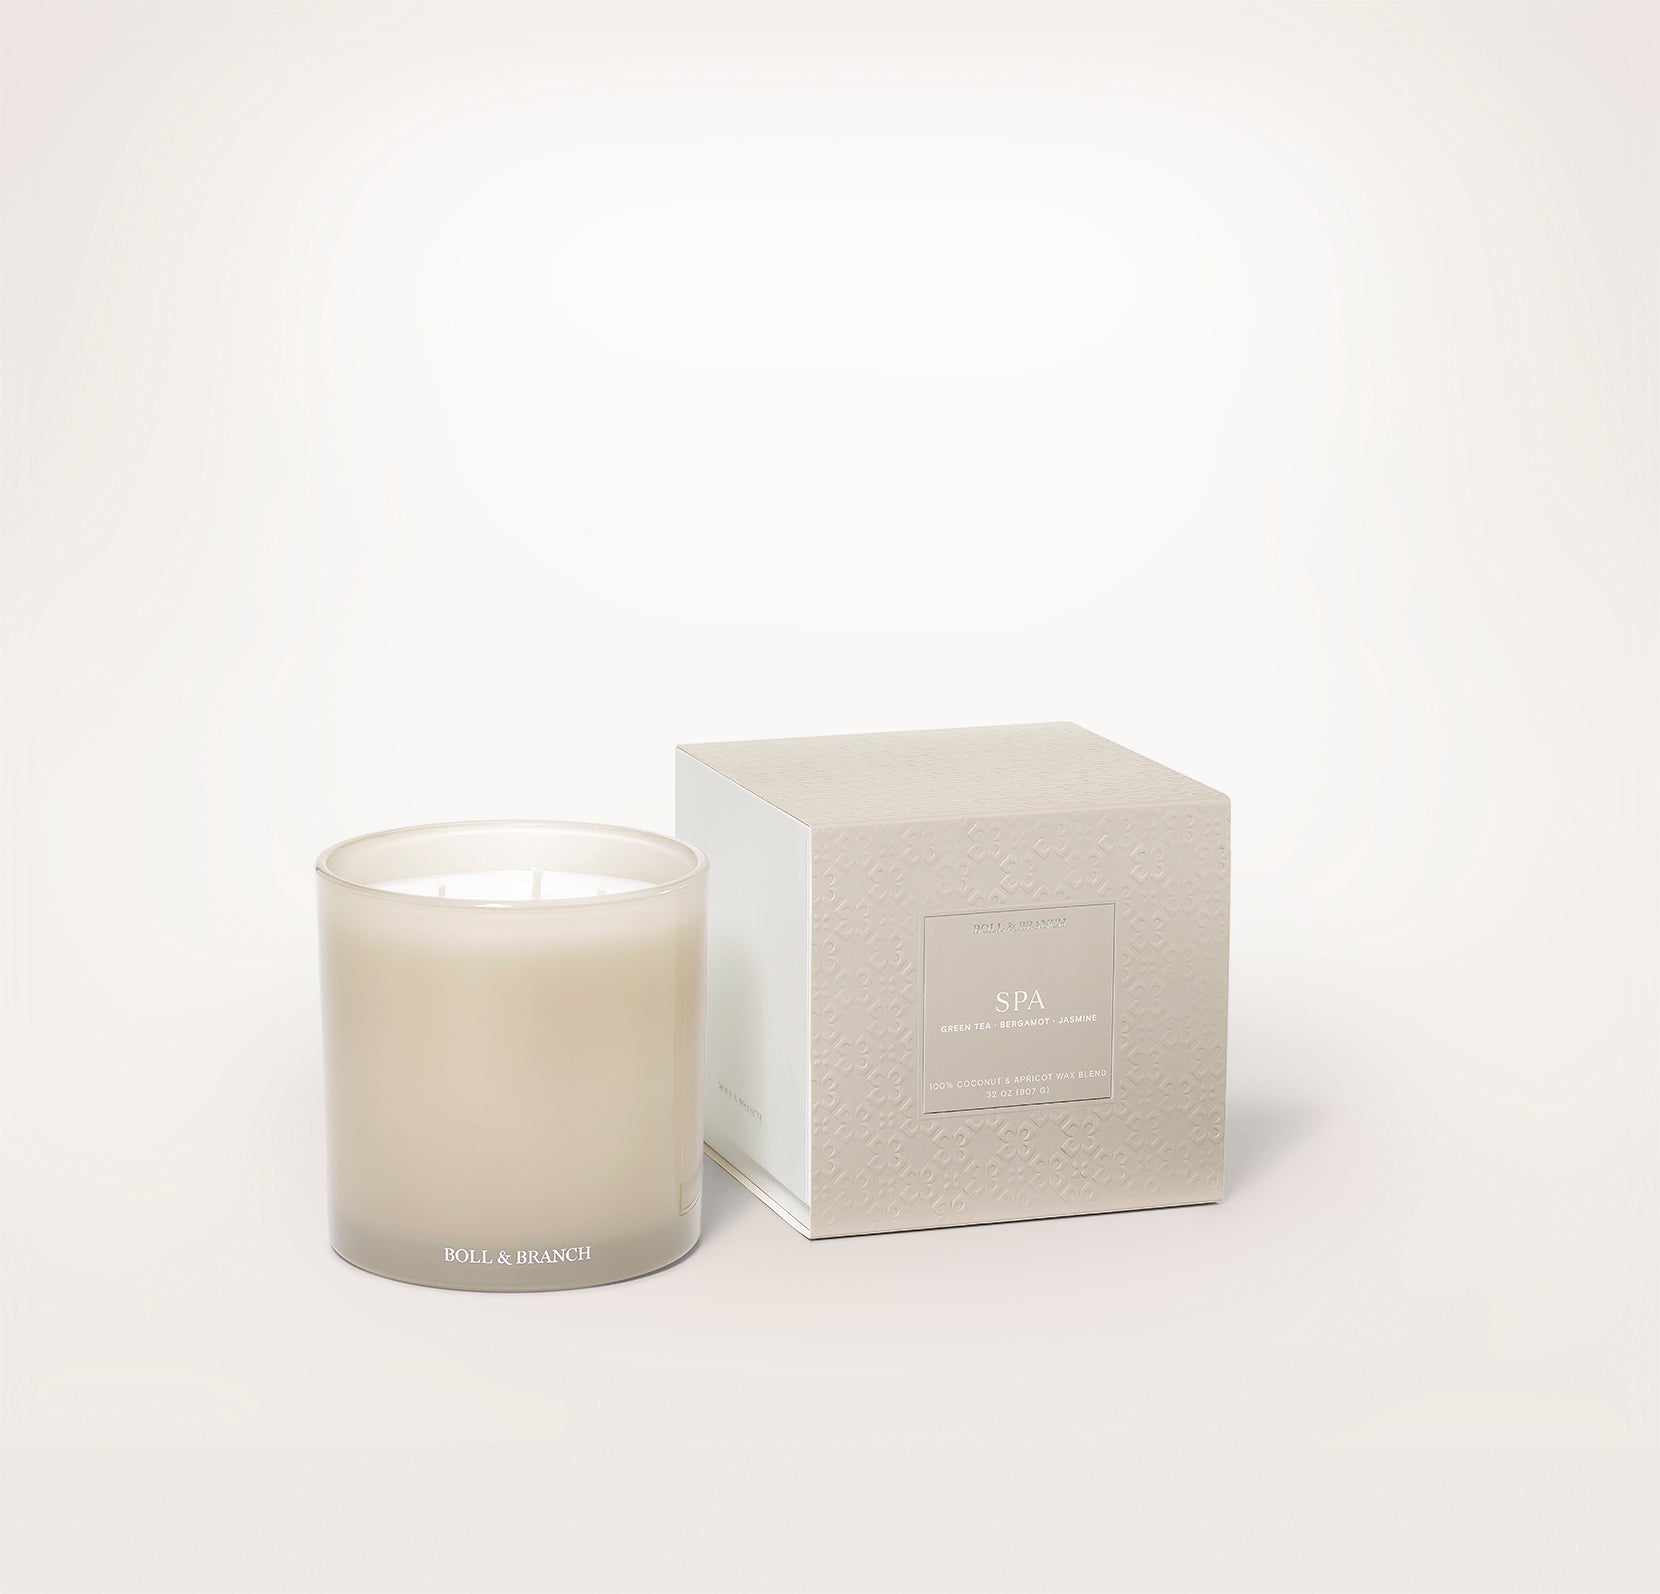 Triple Wick Candle in Spa